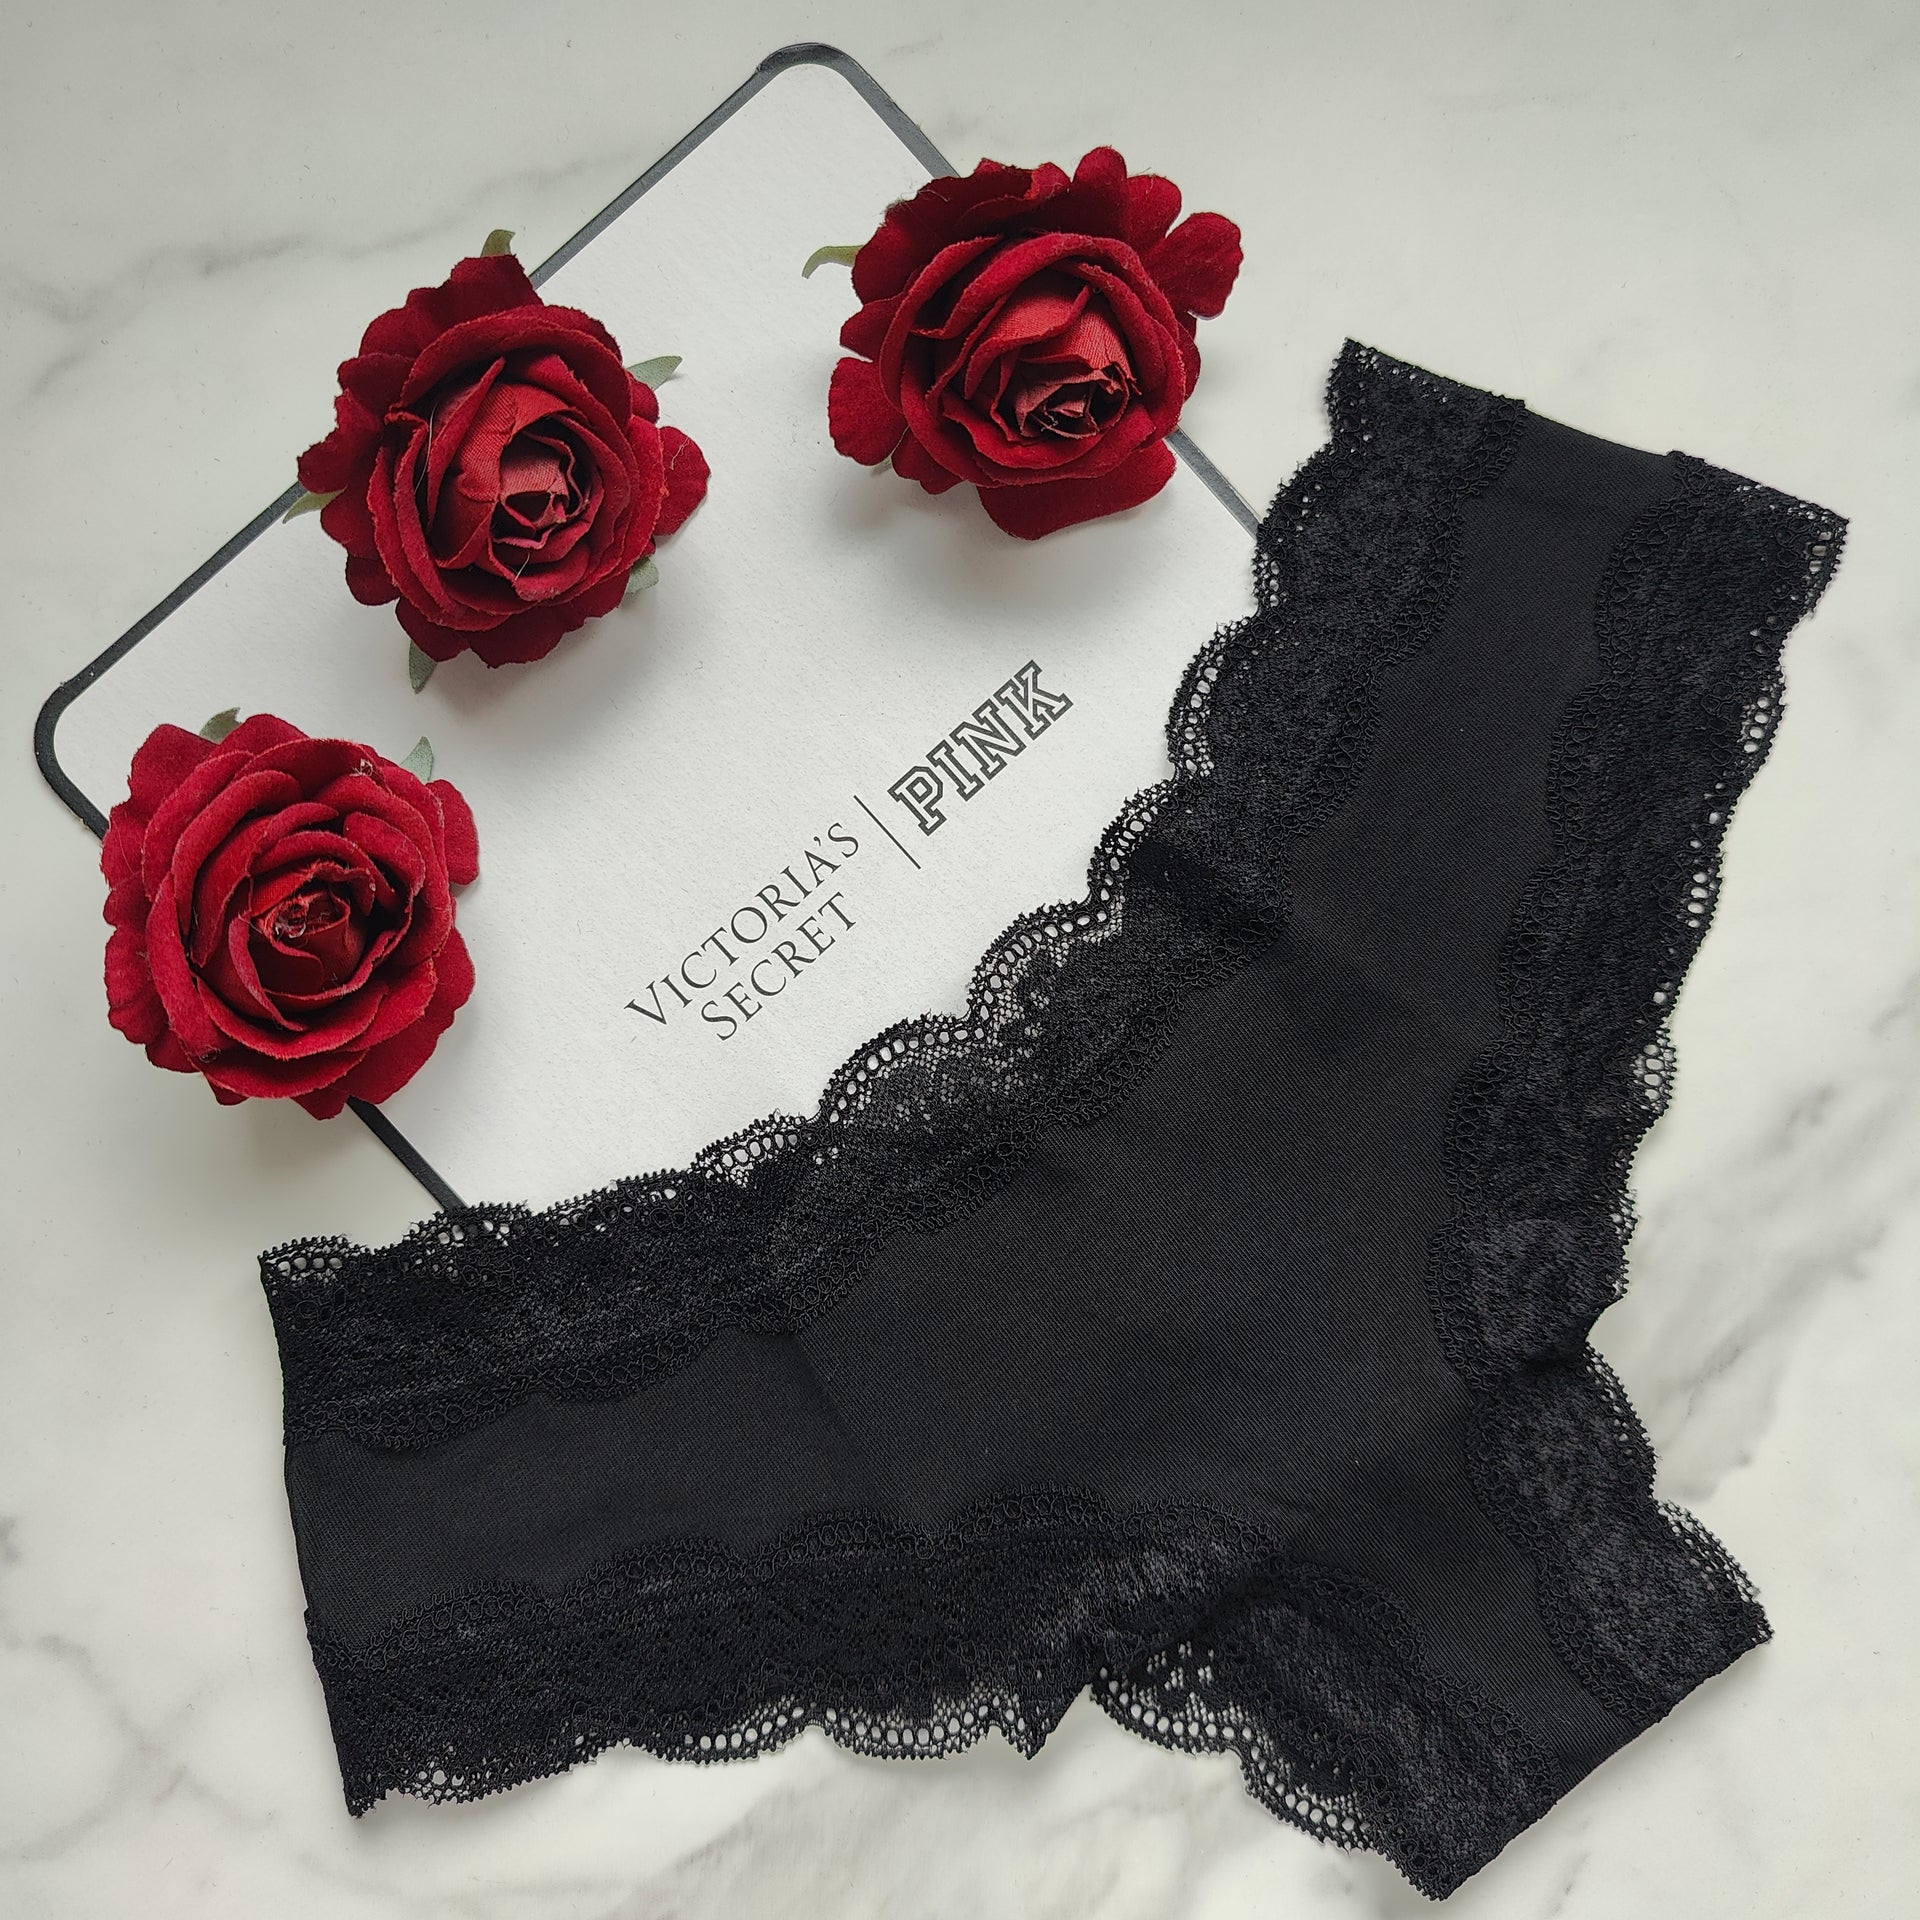 Everyday Lace-Trim Cheekster Panty